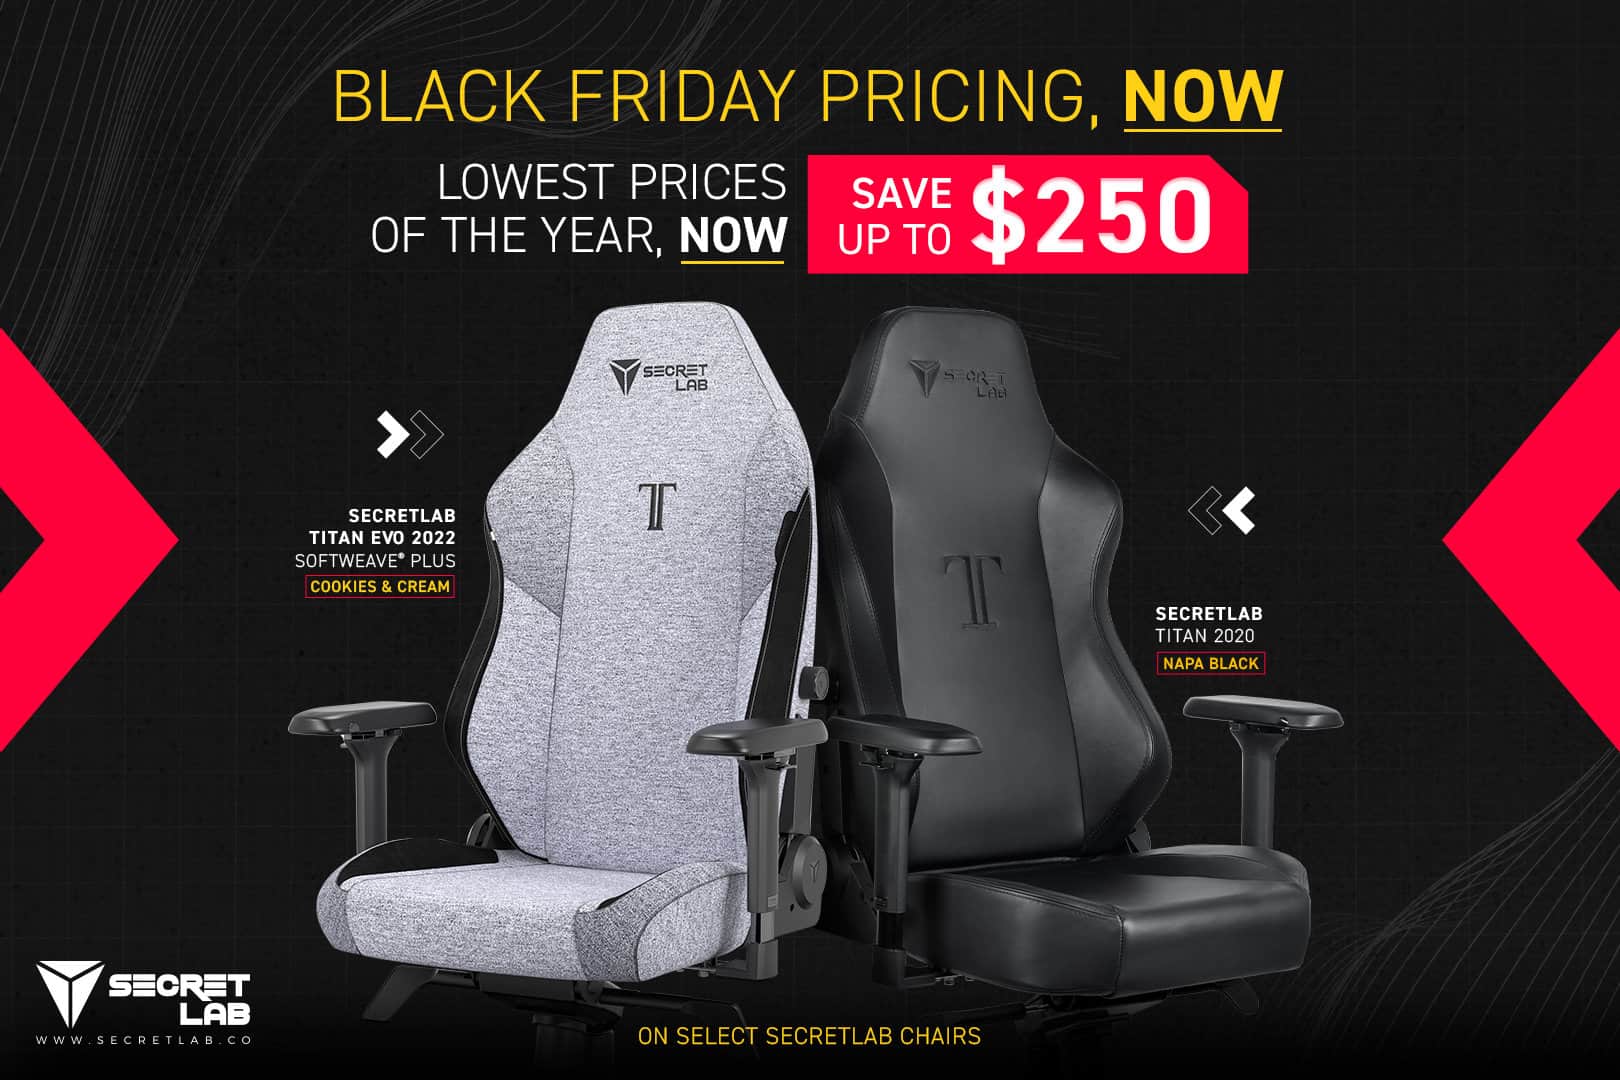 Secretlab Chairs prices cut by up to $250￼